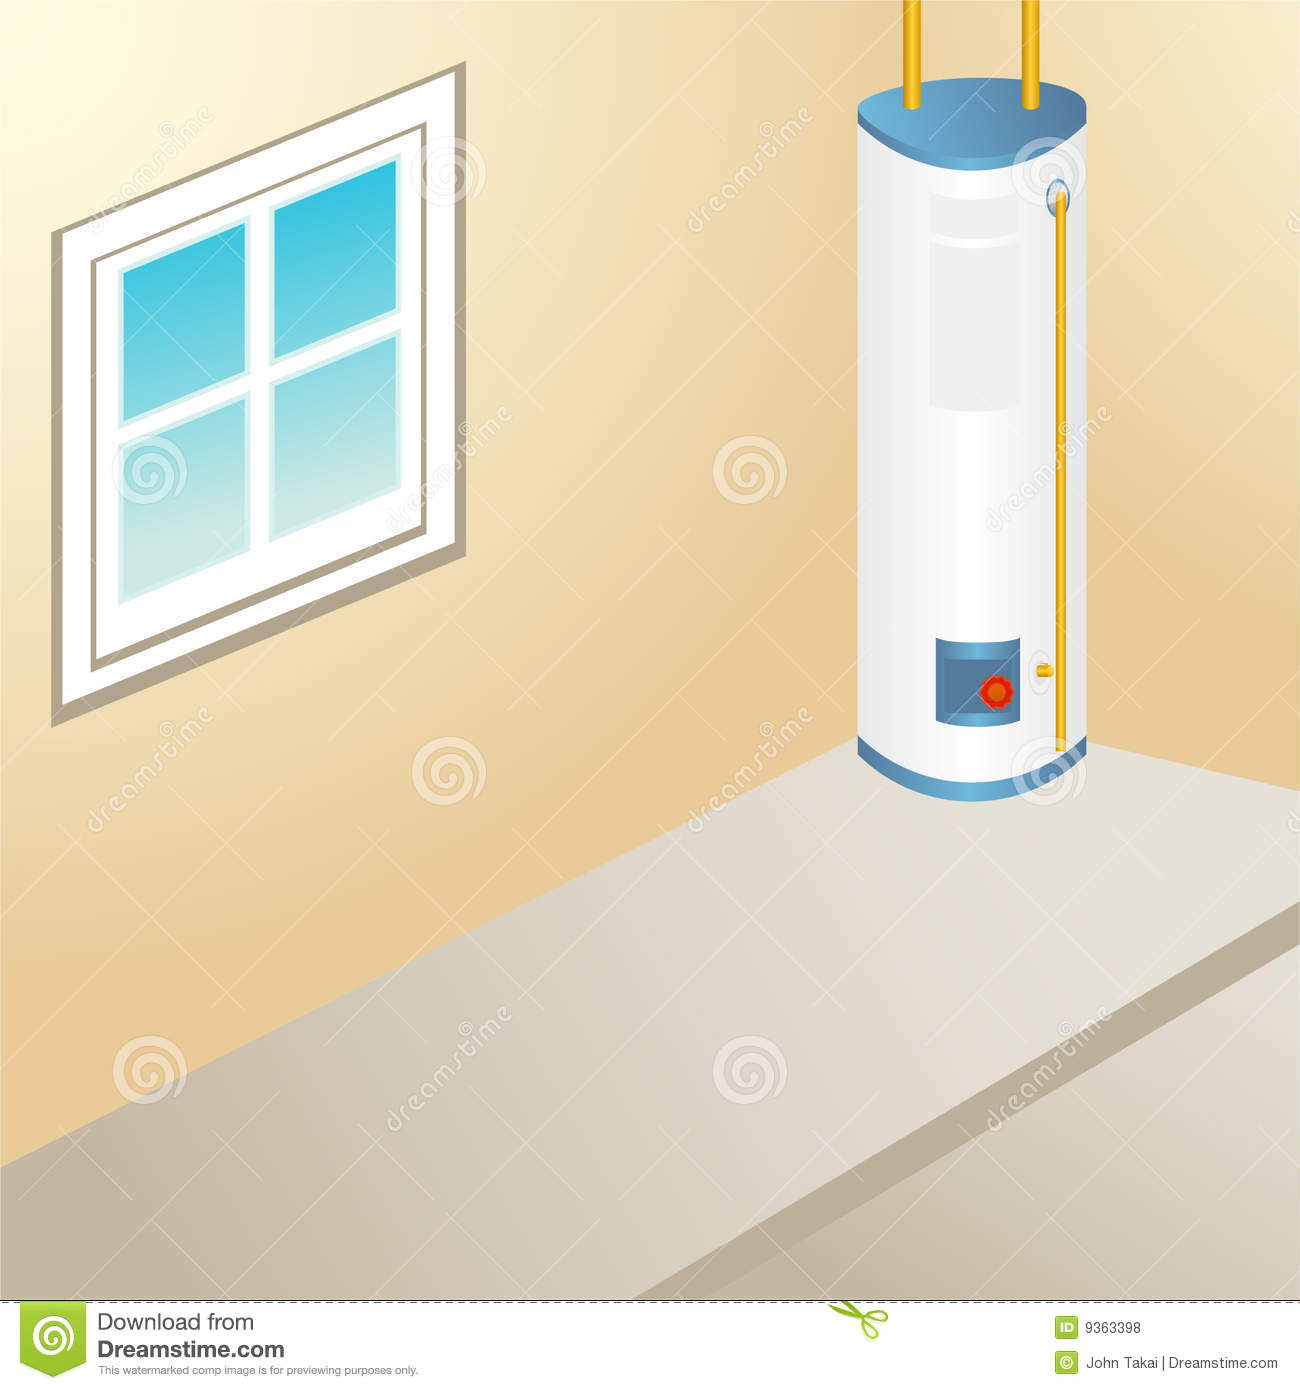 Outdoor Water Heater Royalty Free Stock Photos   Image  9363398